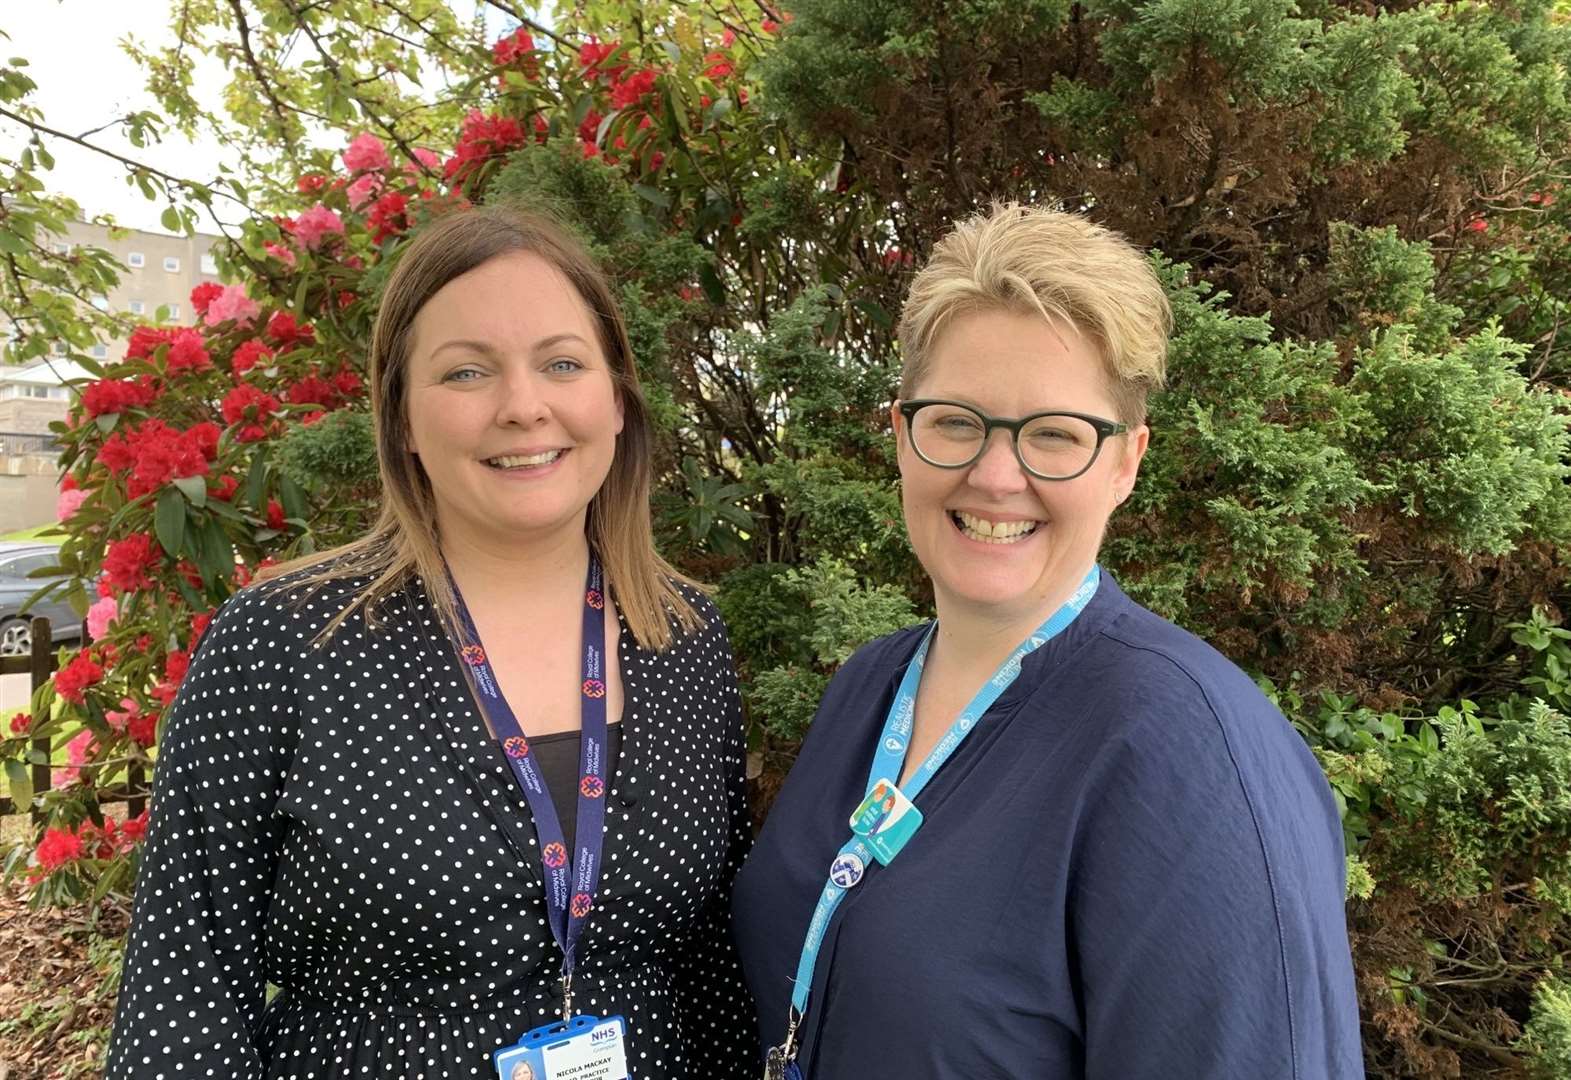 NHS Grampian recruits two new consultant midwives to support Moray maternity services